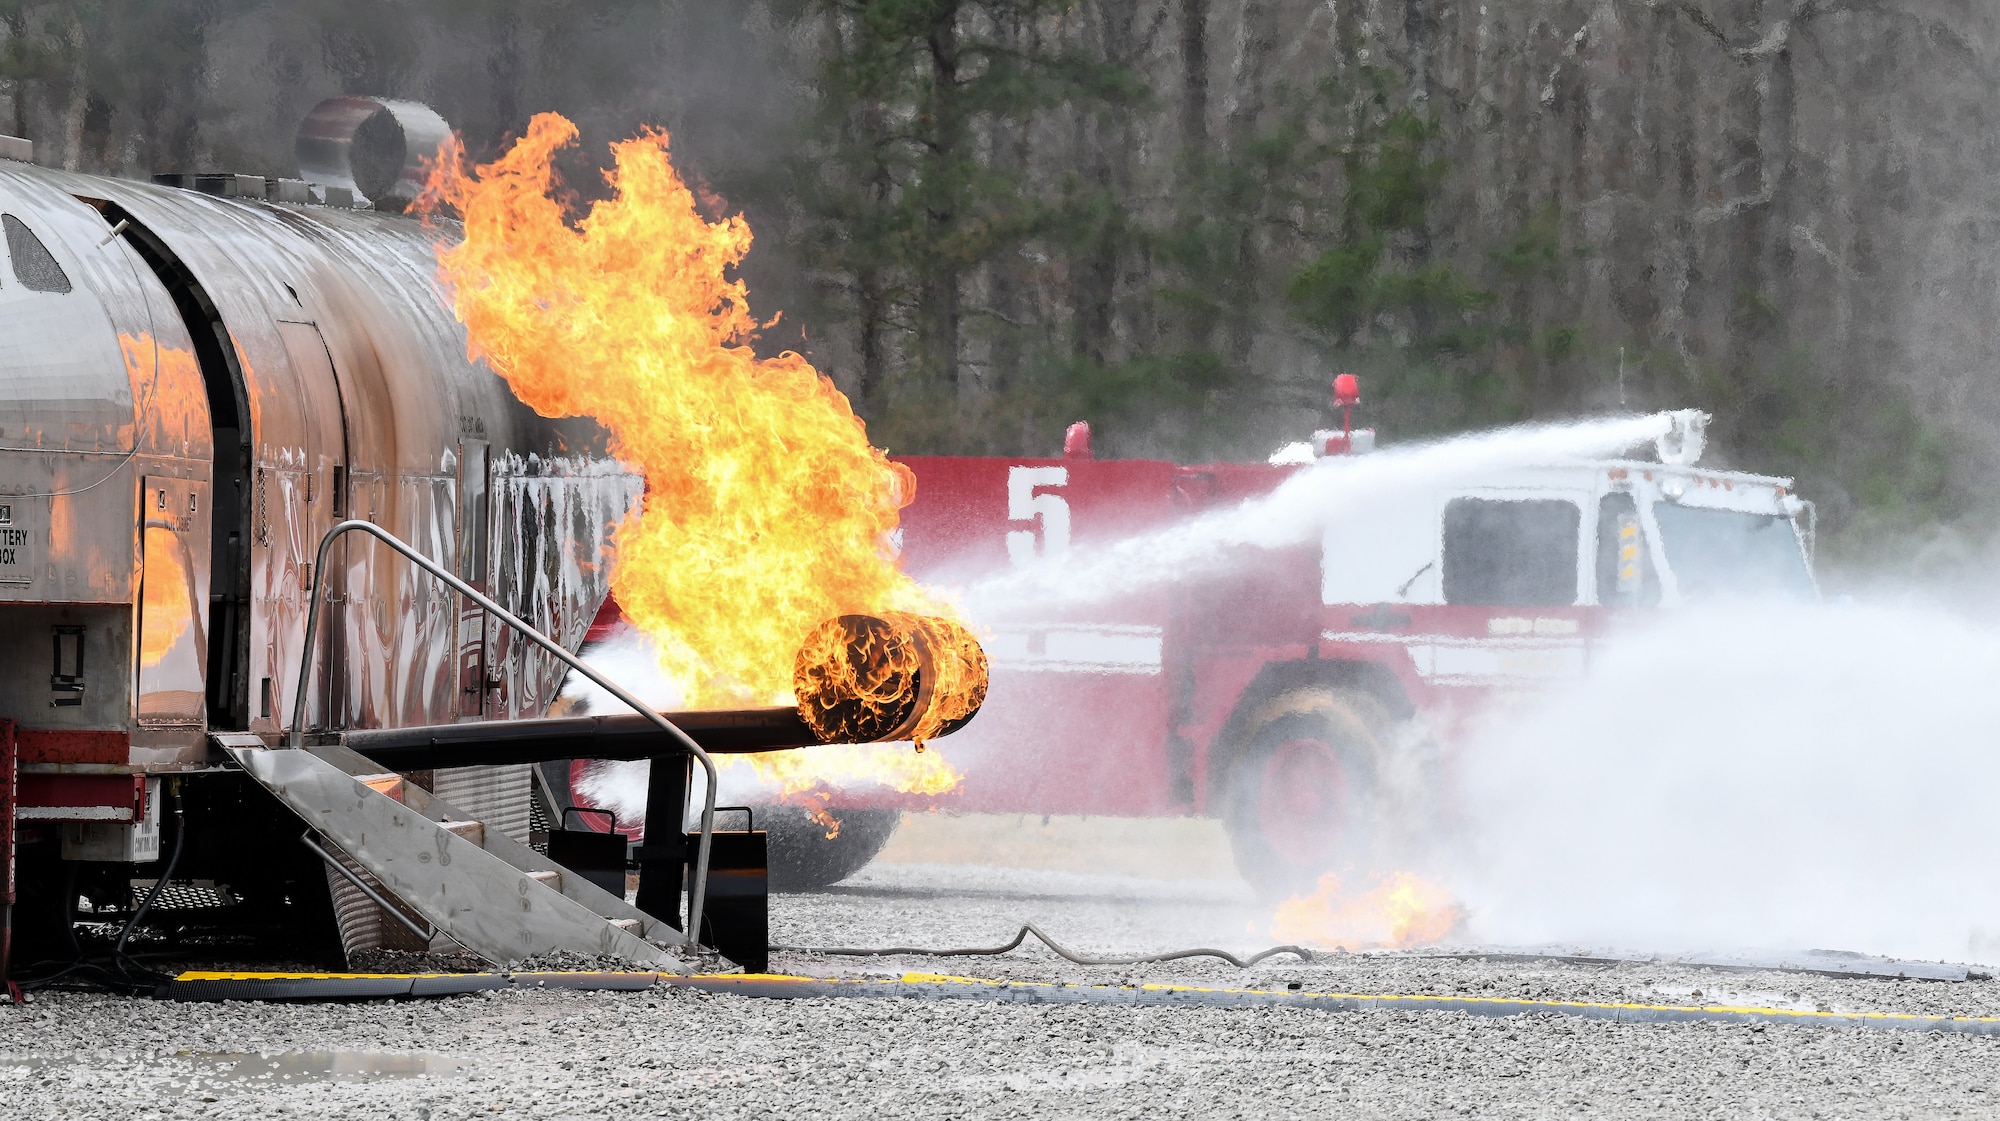 Arnold Air Force Base Fire and Emergency Services personnel use the roof turret on an aircraft firefighting vehicle to battle a blaze while training, March 5, 2020, on aircraft rescue and firefighting techniques at the fire crew’s training area on base. (U.S. Air Force photo by Jill Pickett)